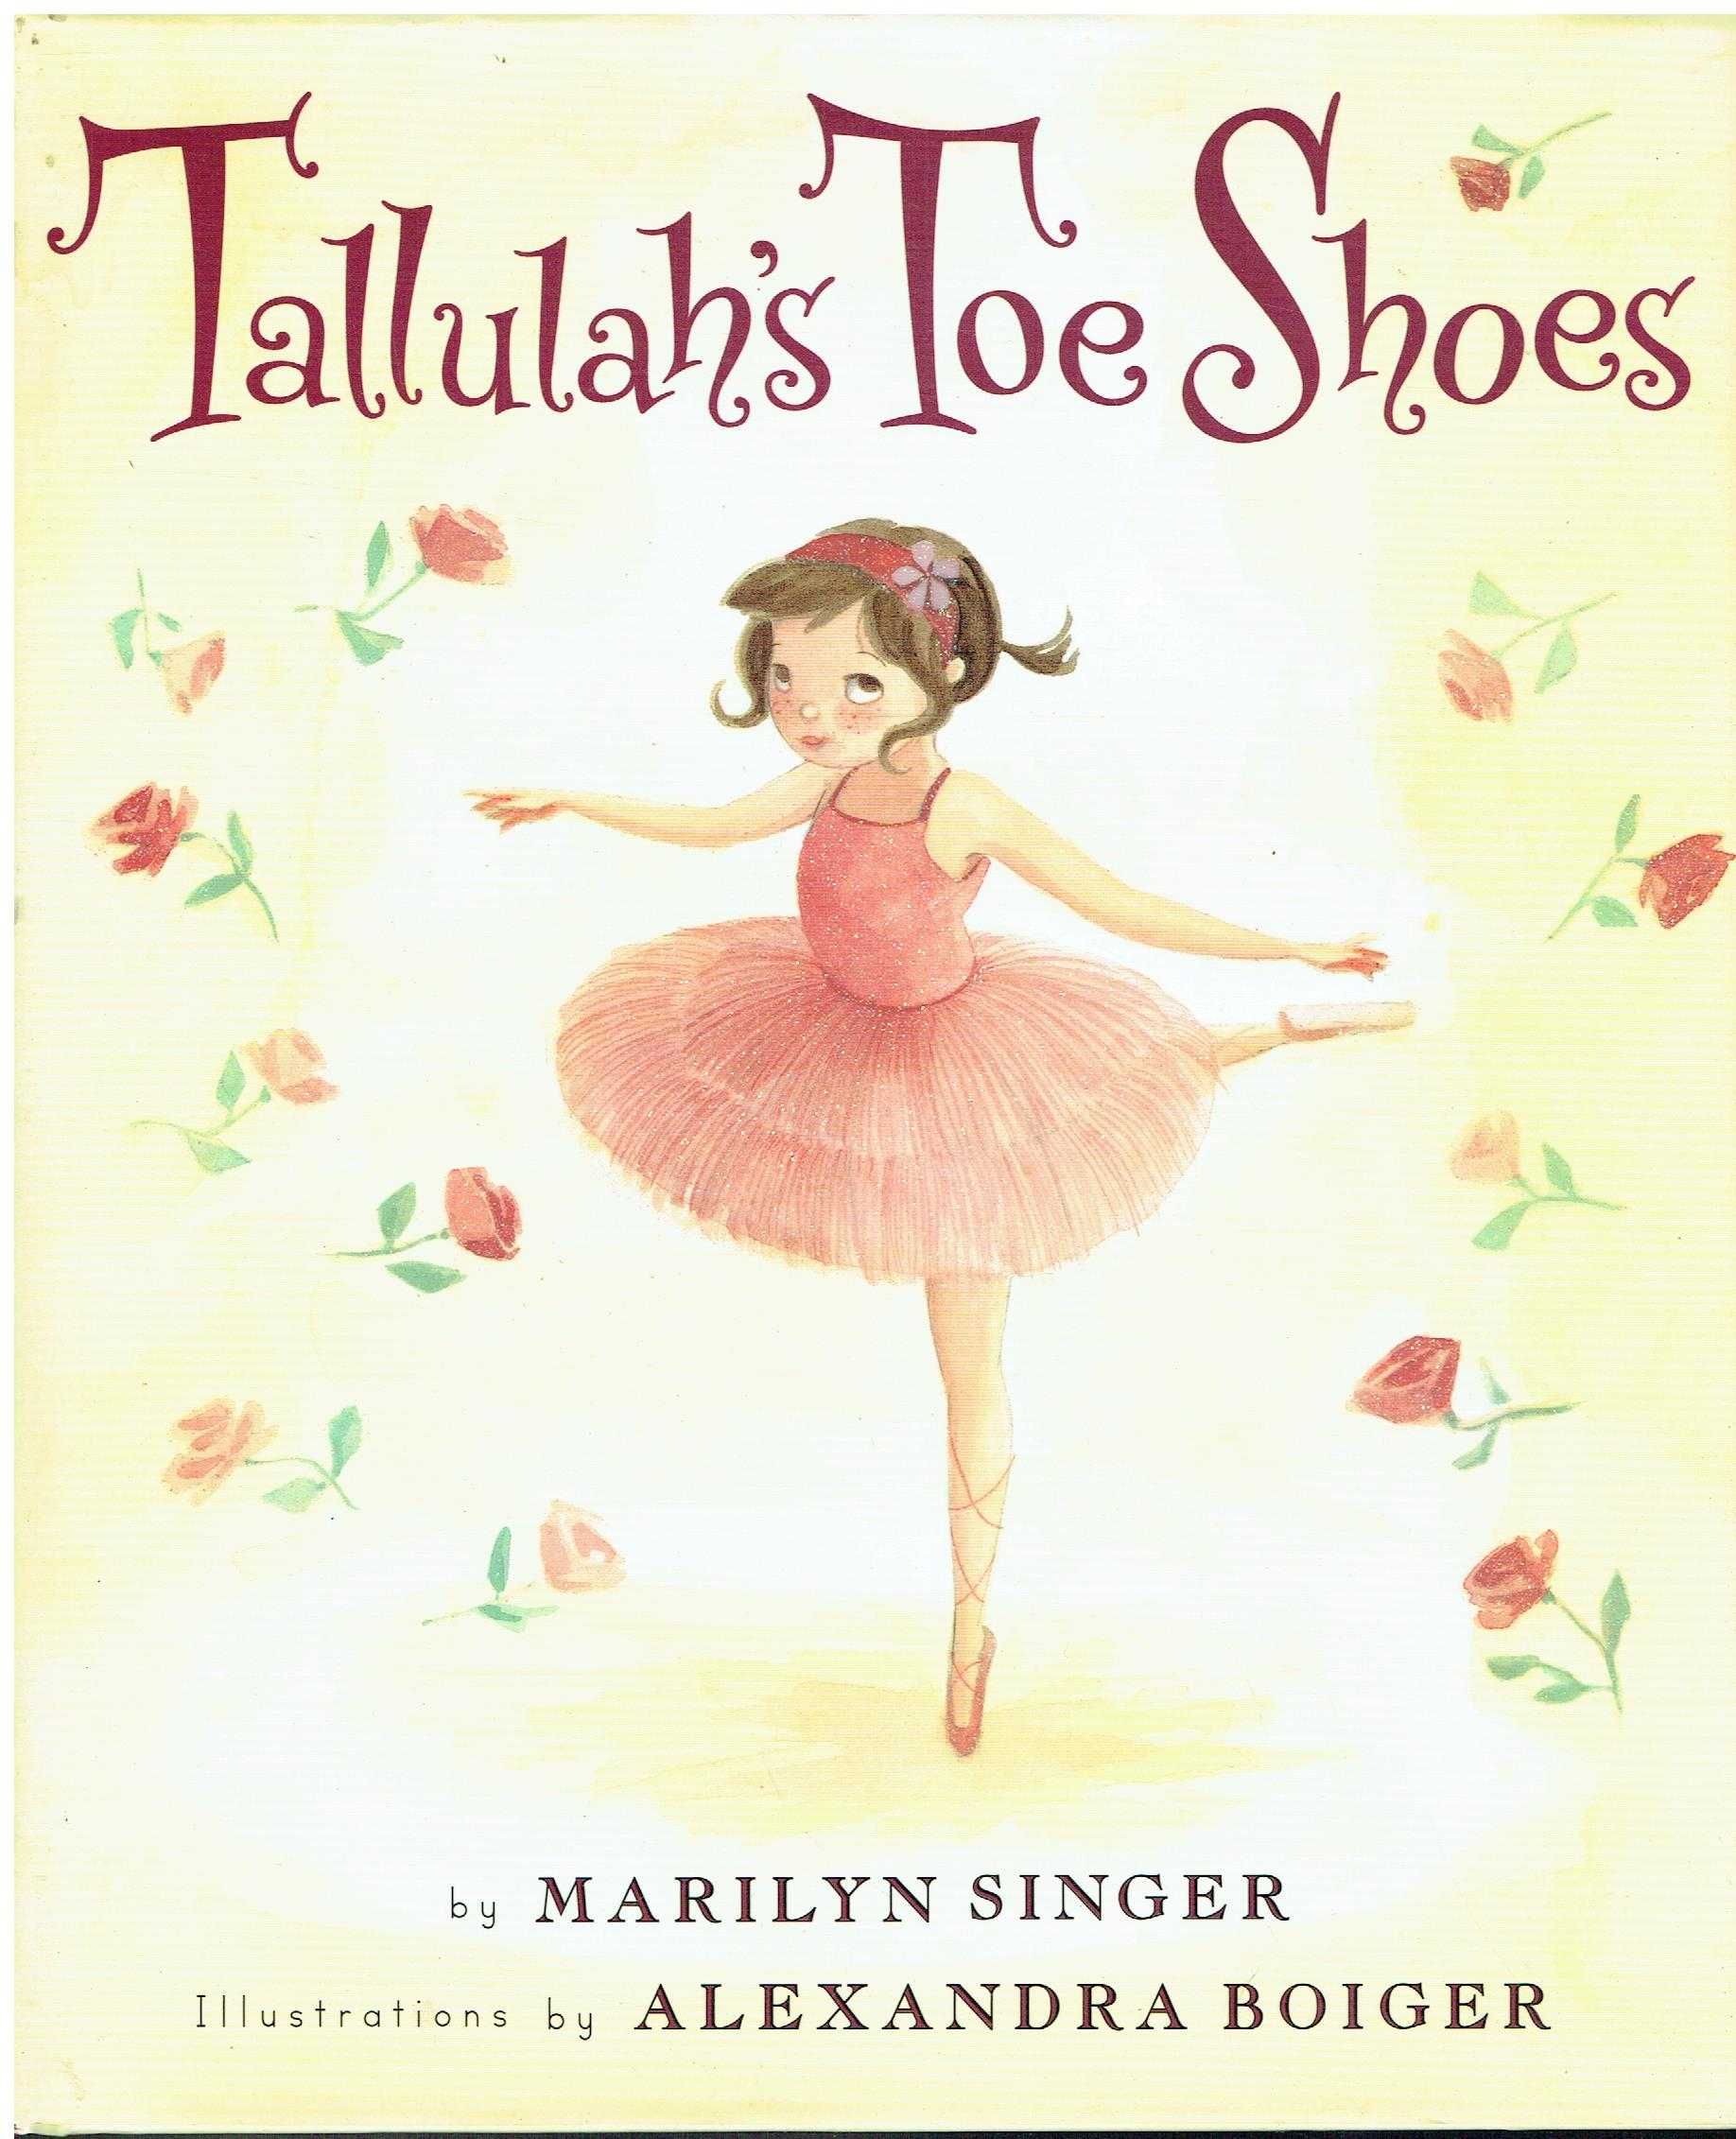 13021

Tallulah's Toe Shoes 
by Marilyn Singer